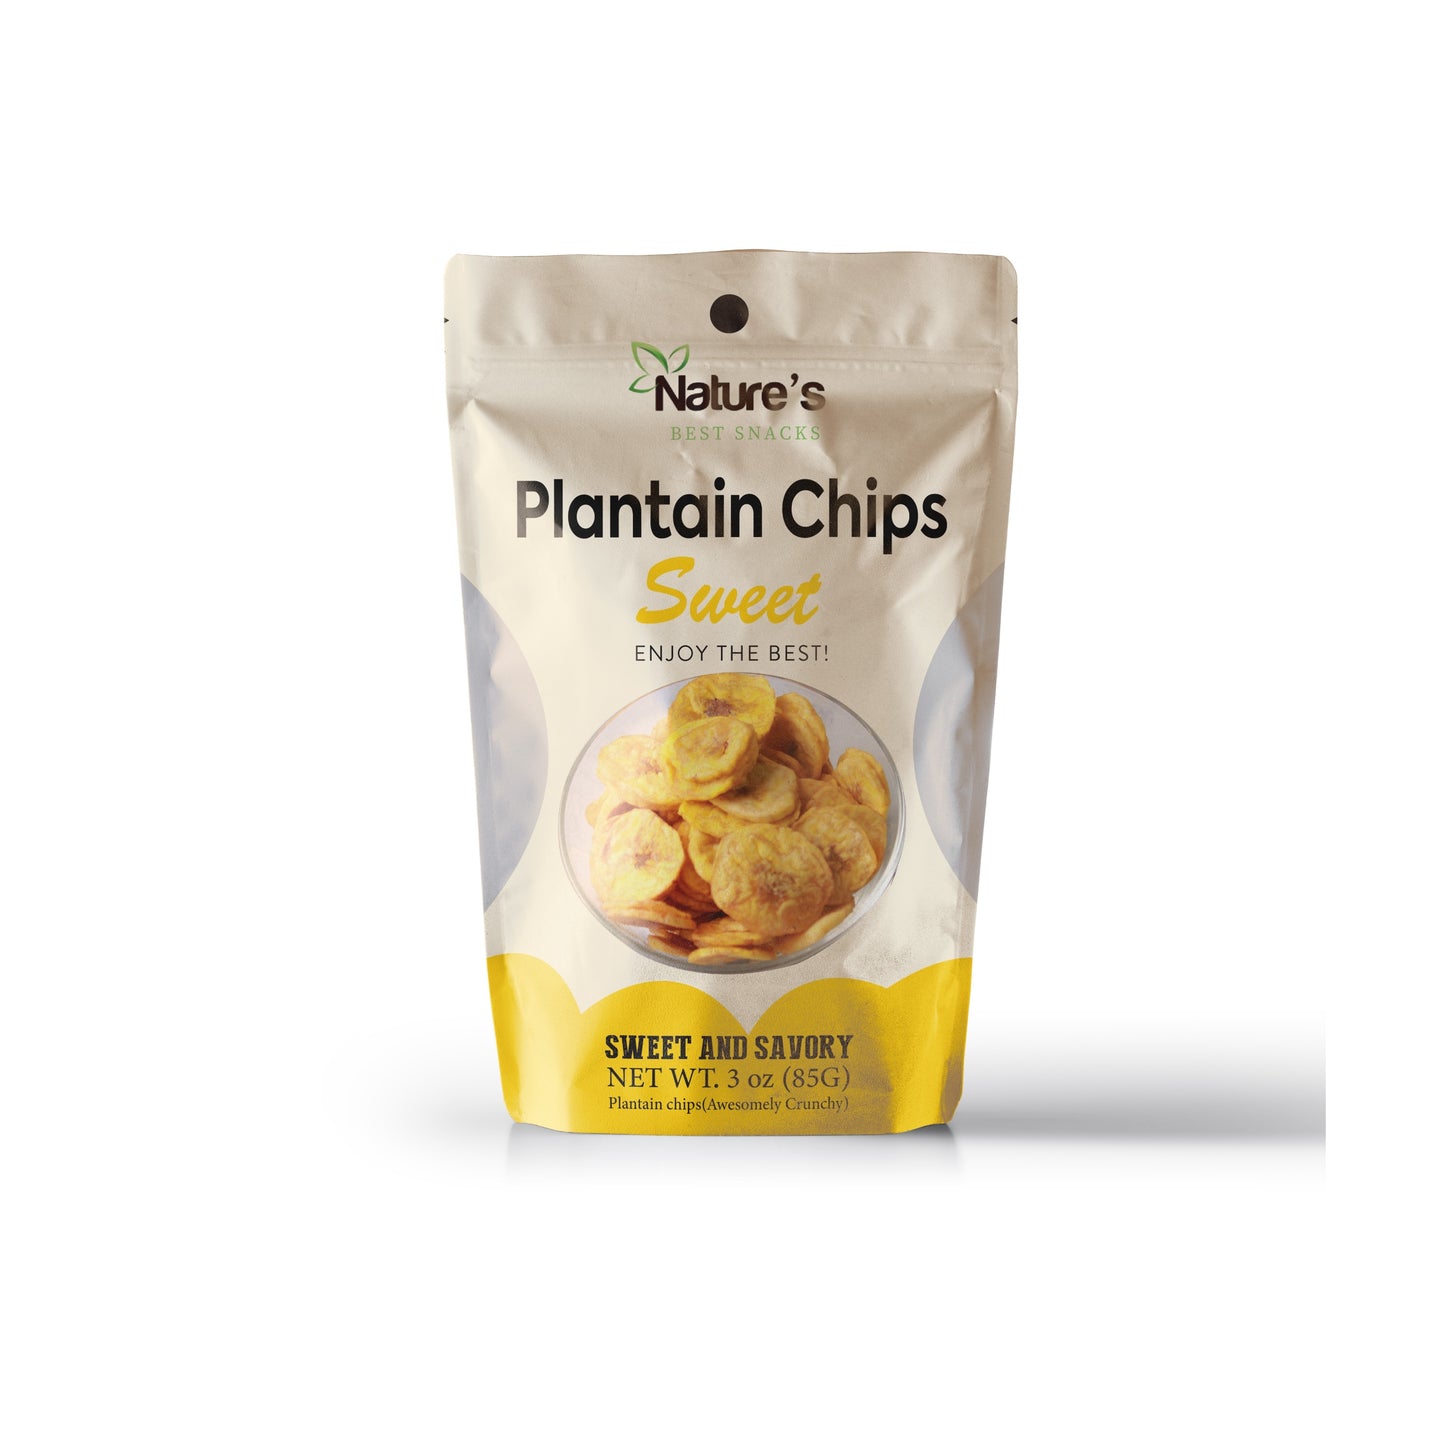 Sweet plantain Chips (3 oz).